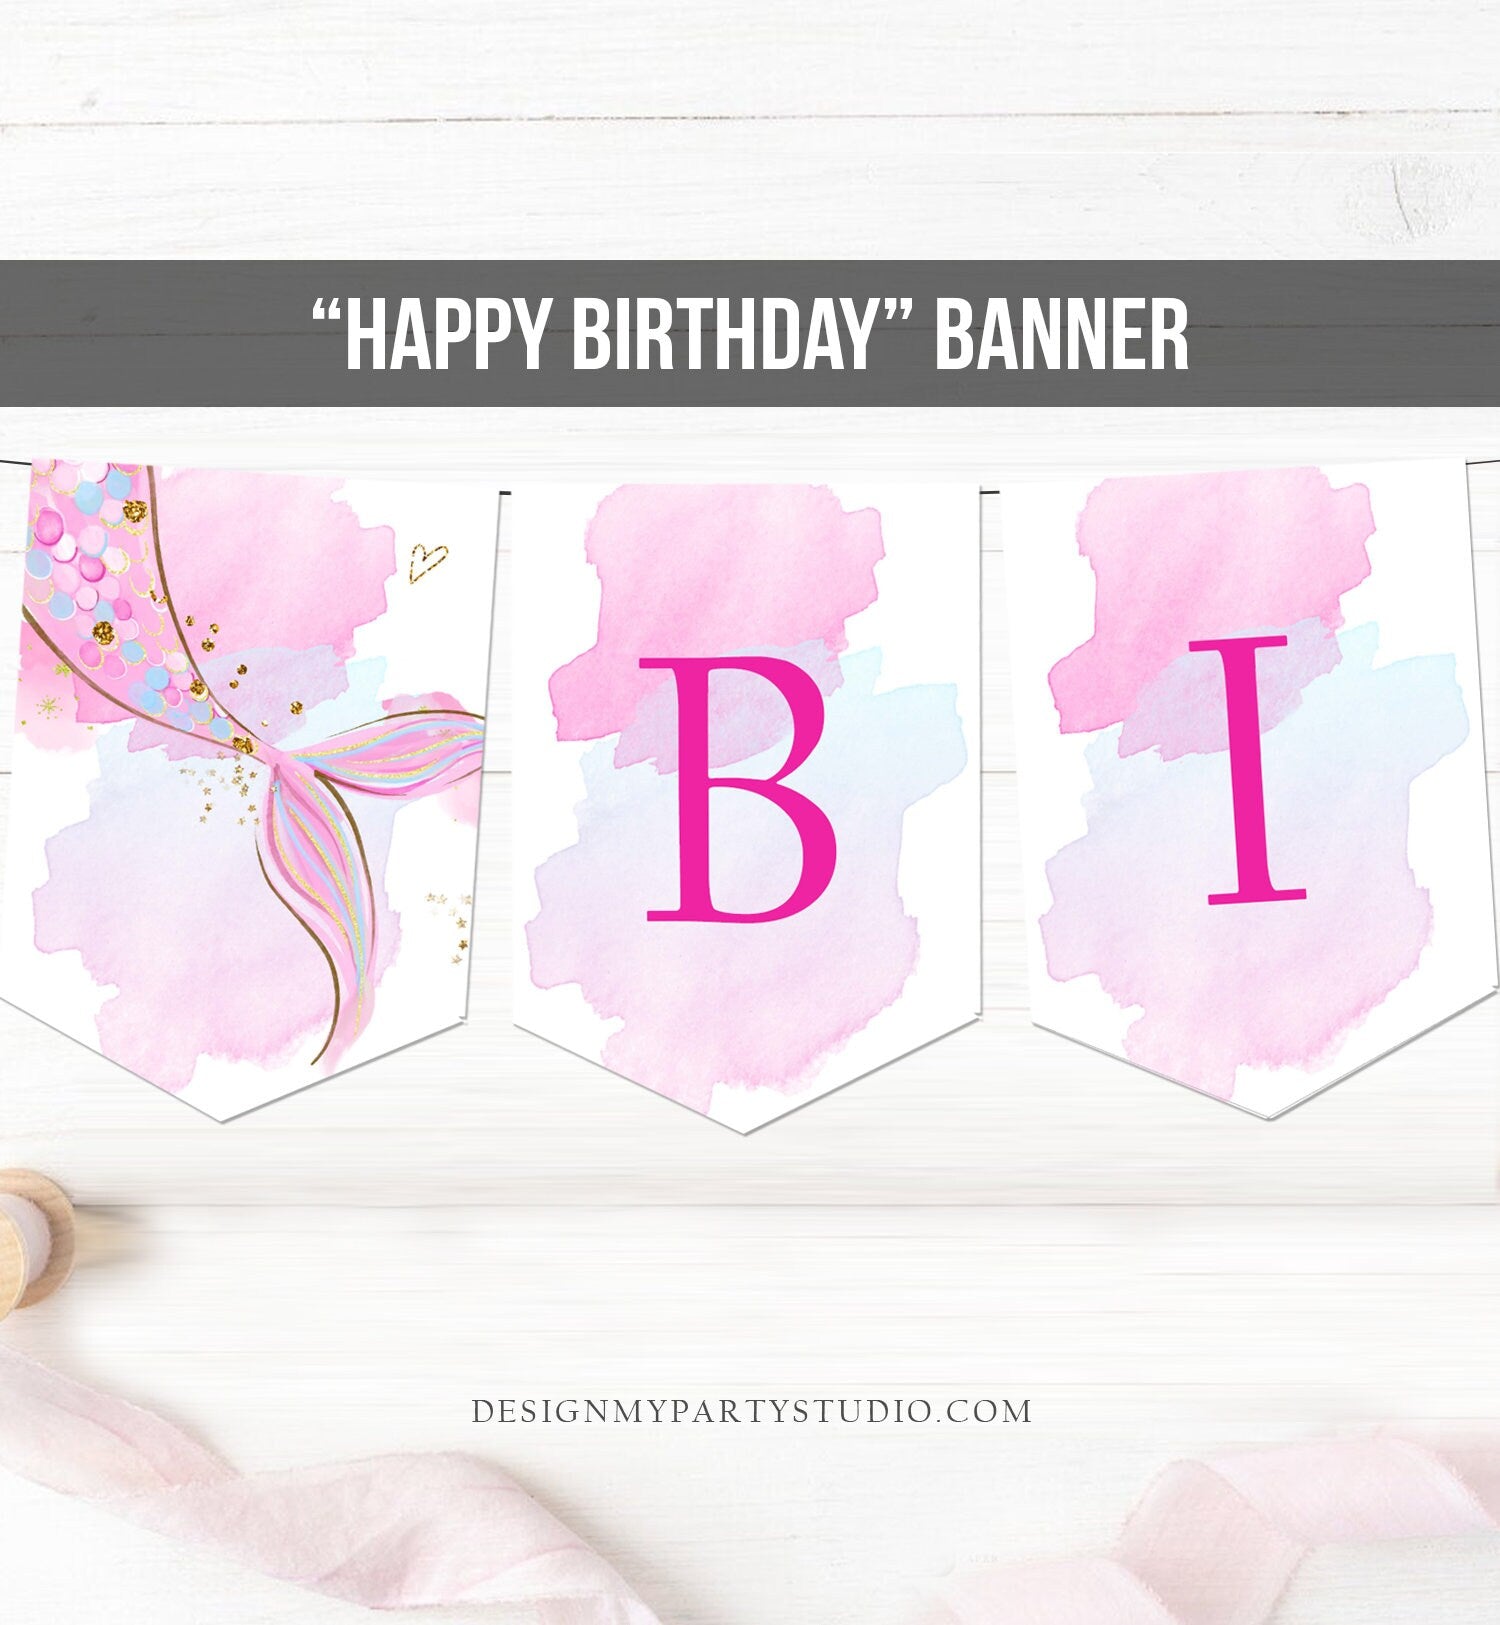 Mermaid Happy Birthday Banner Mermaid Birthday Decor Gold Blush Pink Under The Sea Party Mermaid Tail Decor Instant Download Printable 0403